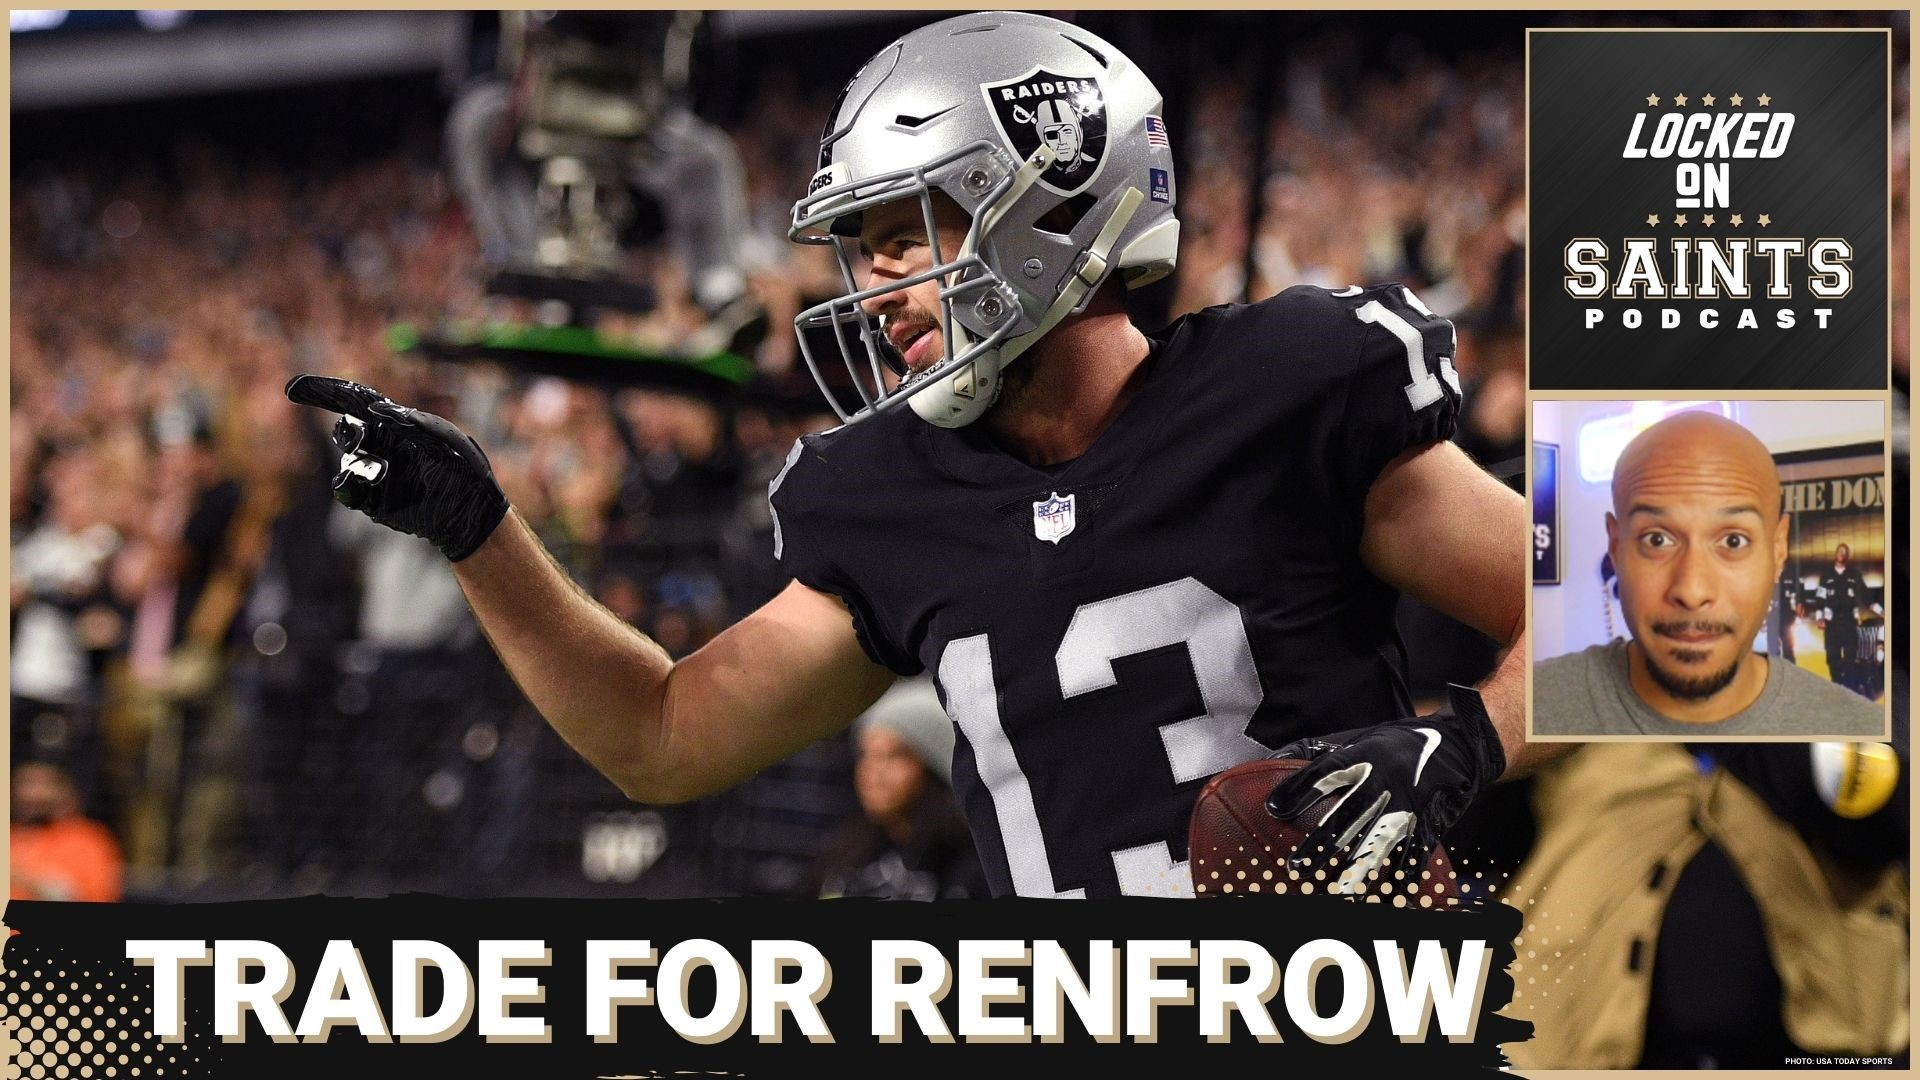 The New Orleans Saints may not want Austin Ekeler, Devin White and of course Lamar Jackson, but a trade for Raiders WR Hunter Renfrow makes sense.